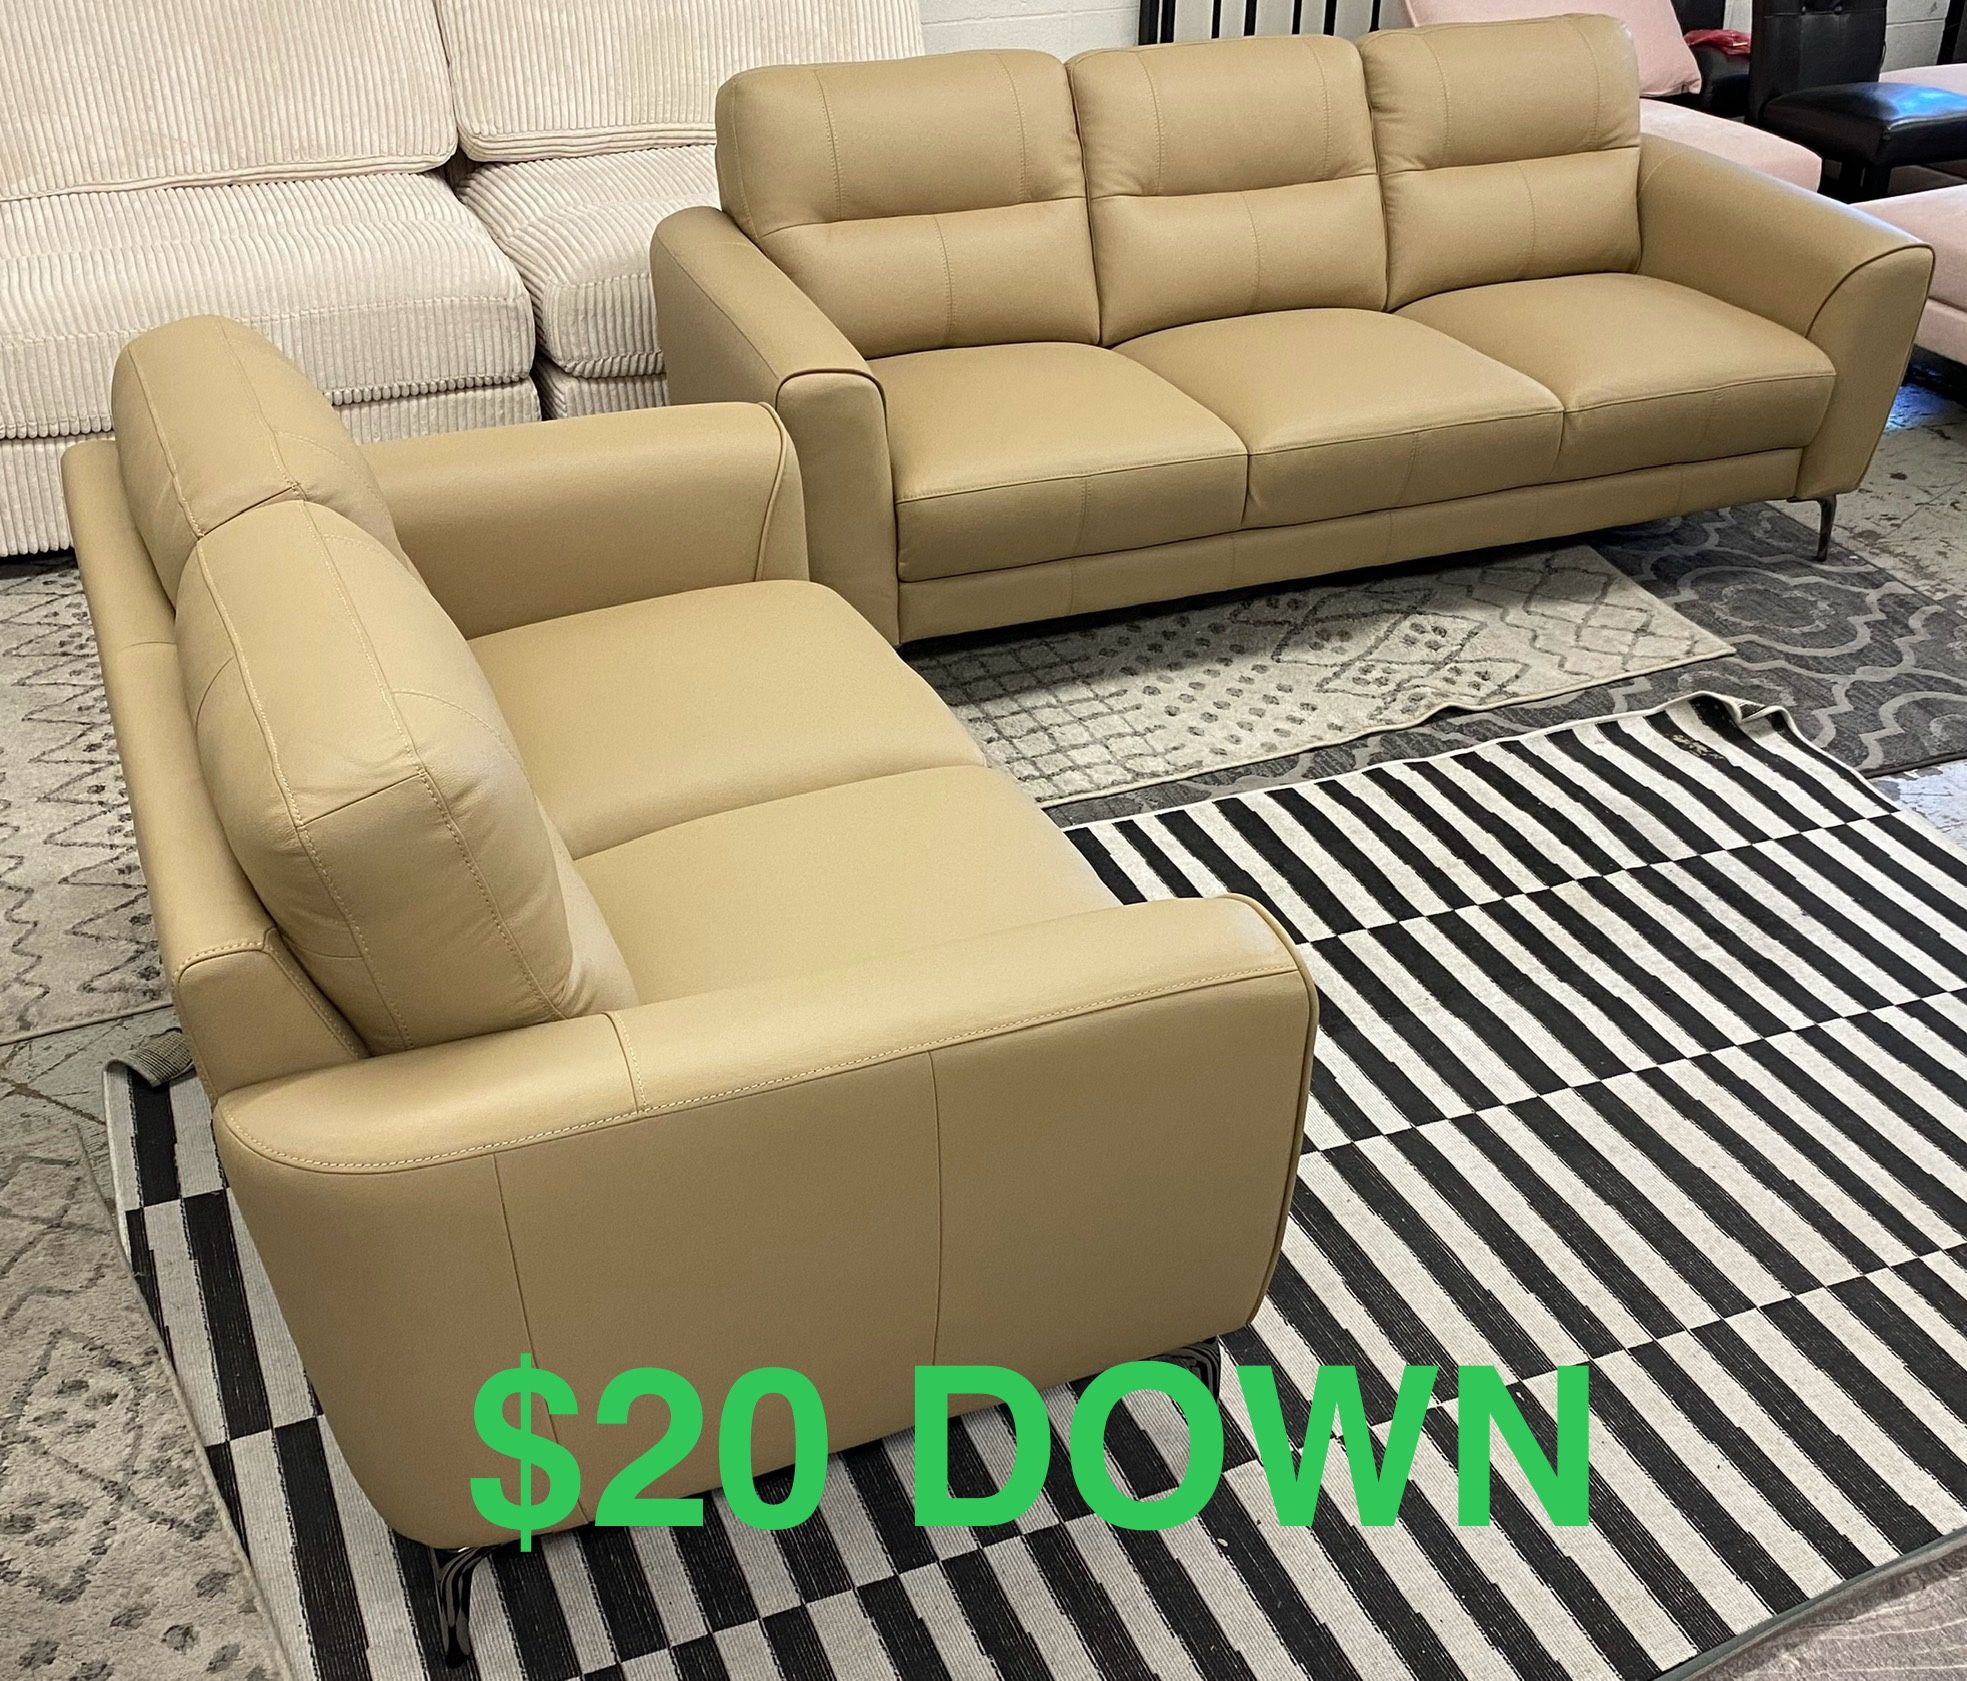 New Top Grain Leather Sofa Set (Finance and Delivery)